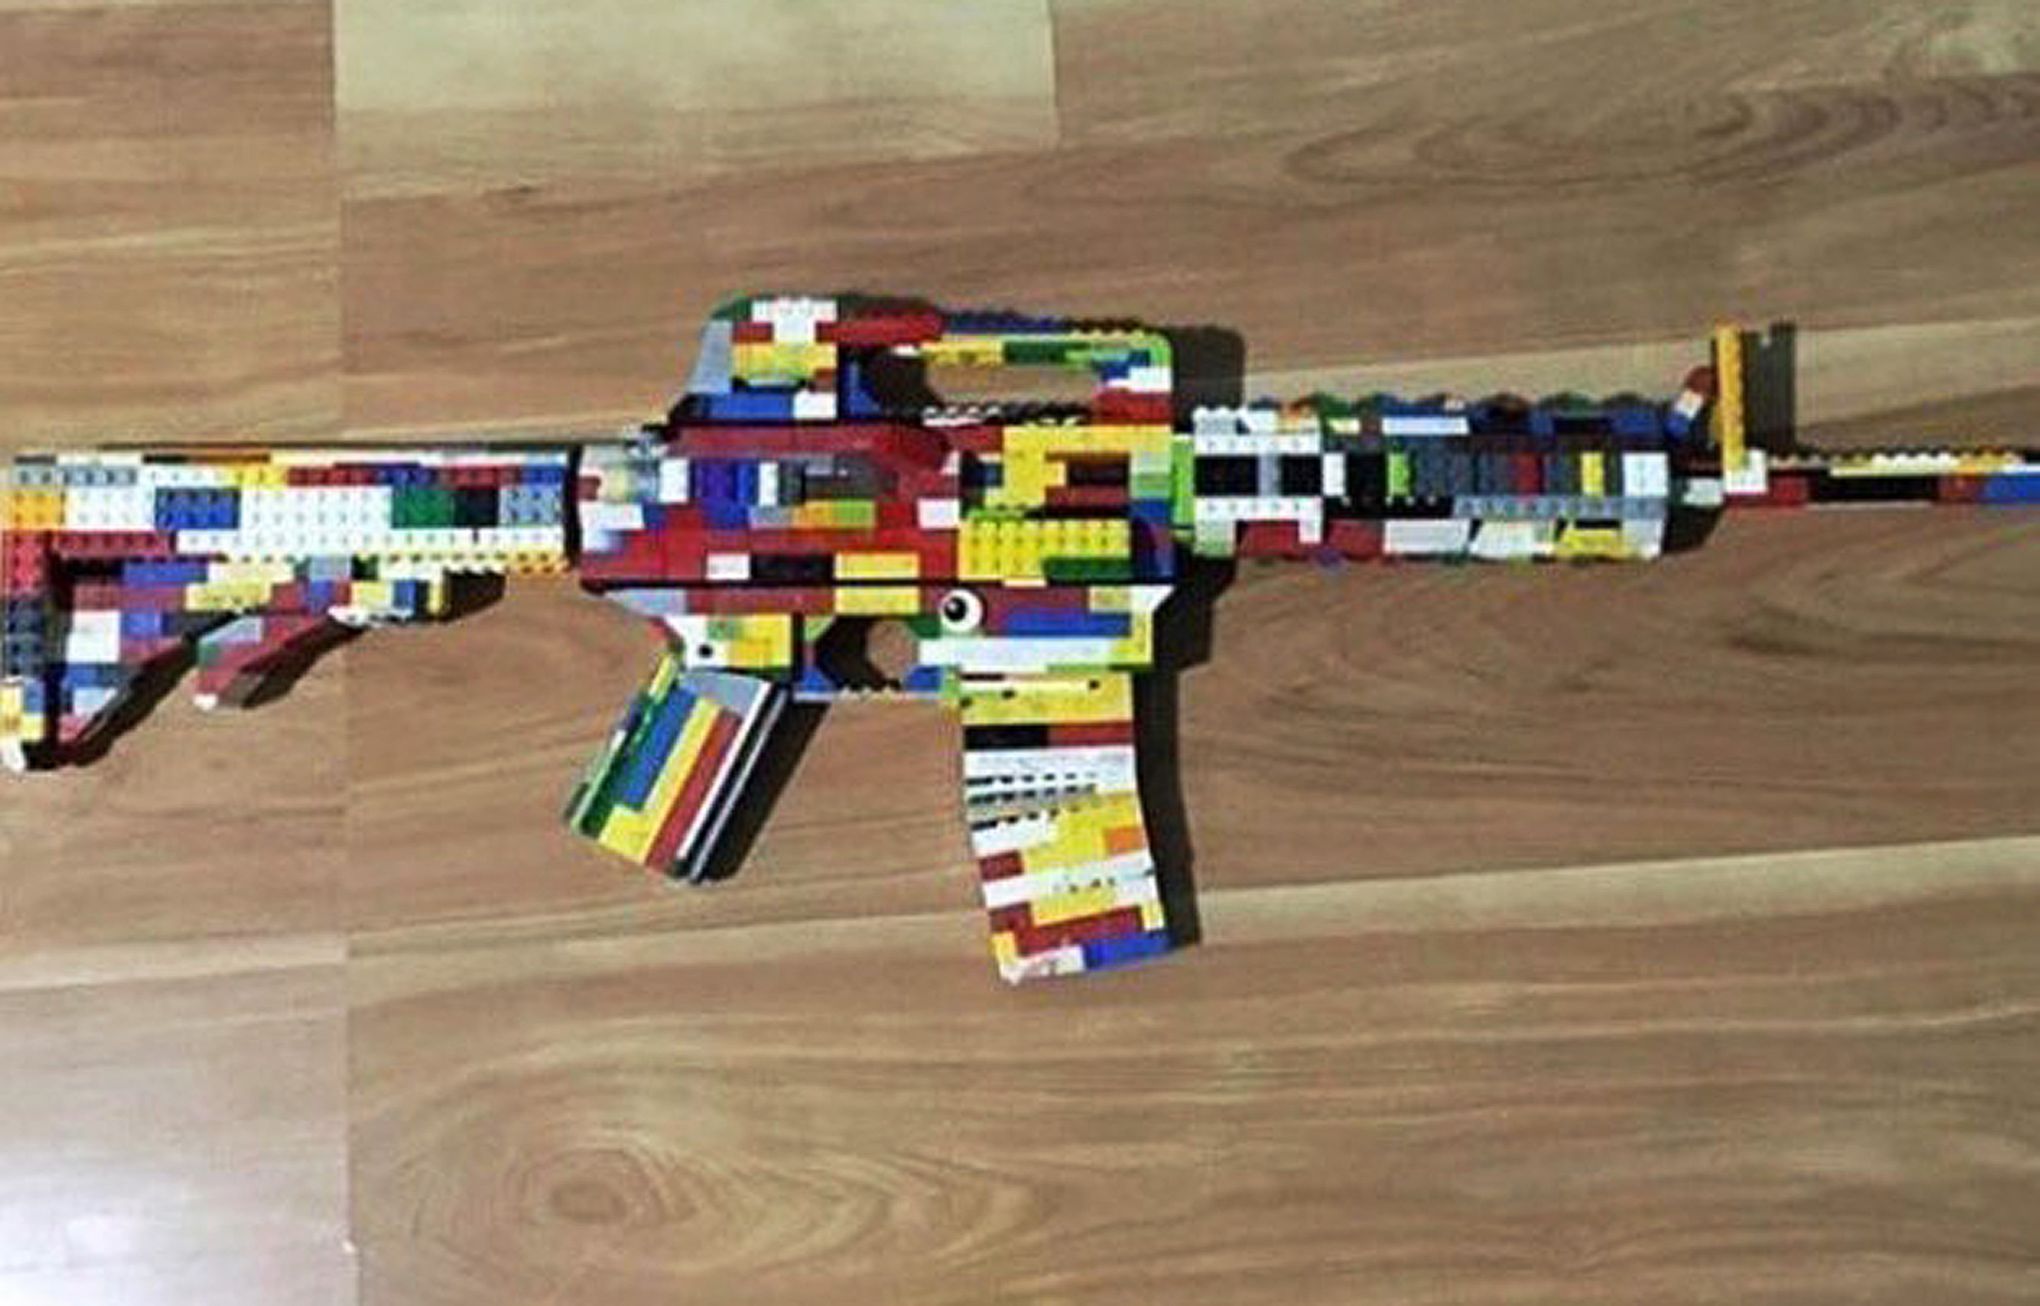 SWAT Team Takes Down Man Armed With LEGO Gun